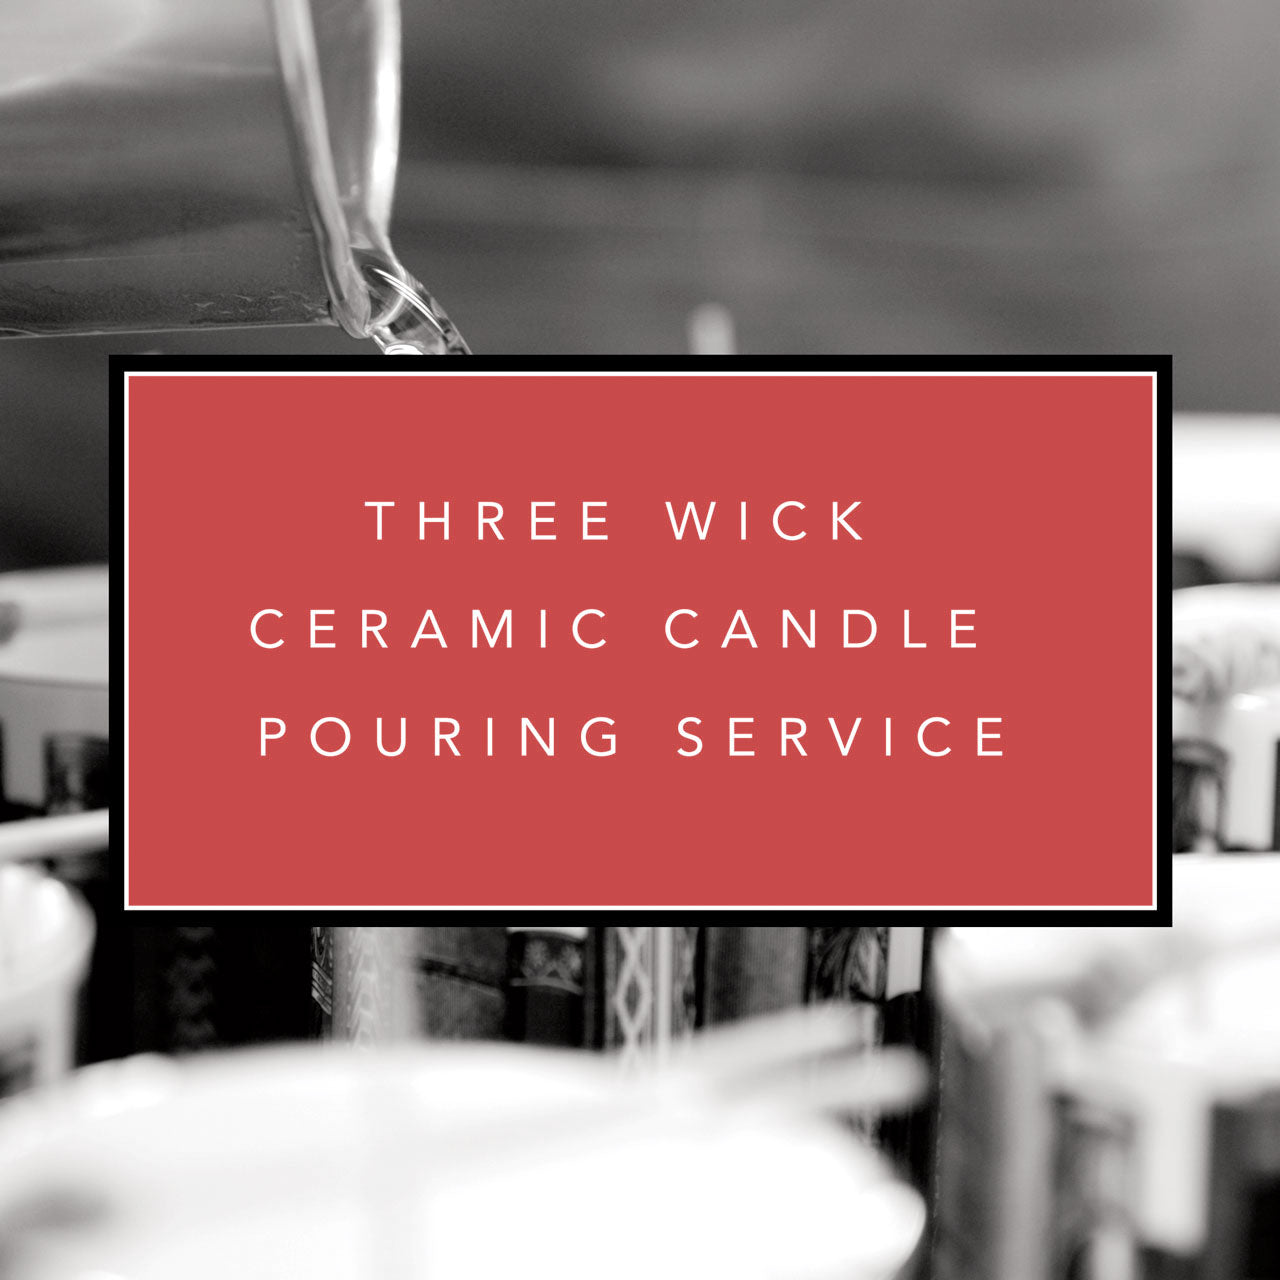 Refill Service for Three Wick Ceramic Candles